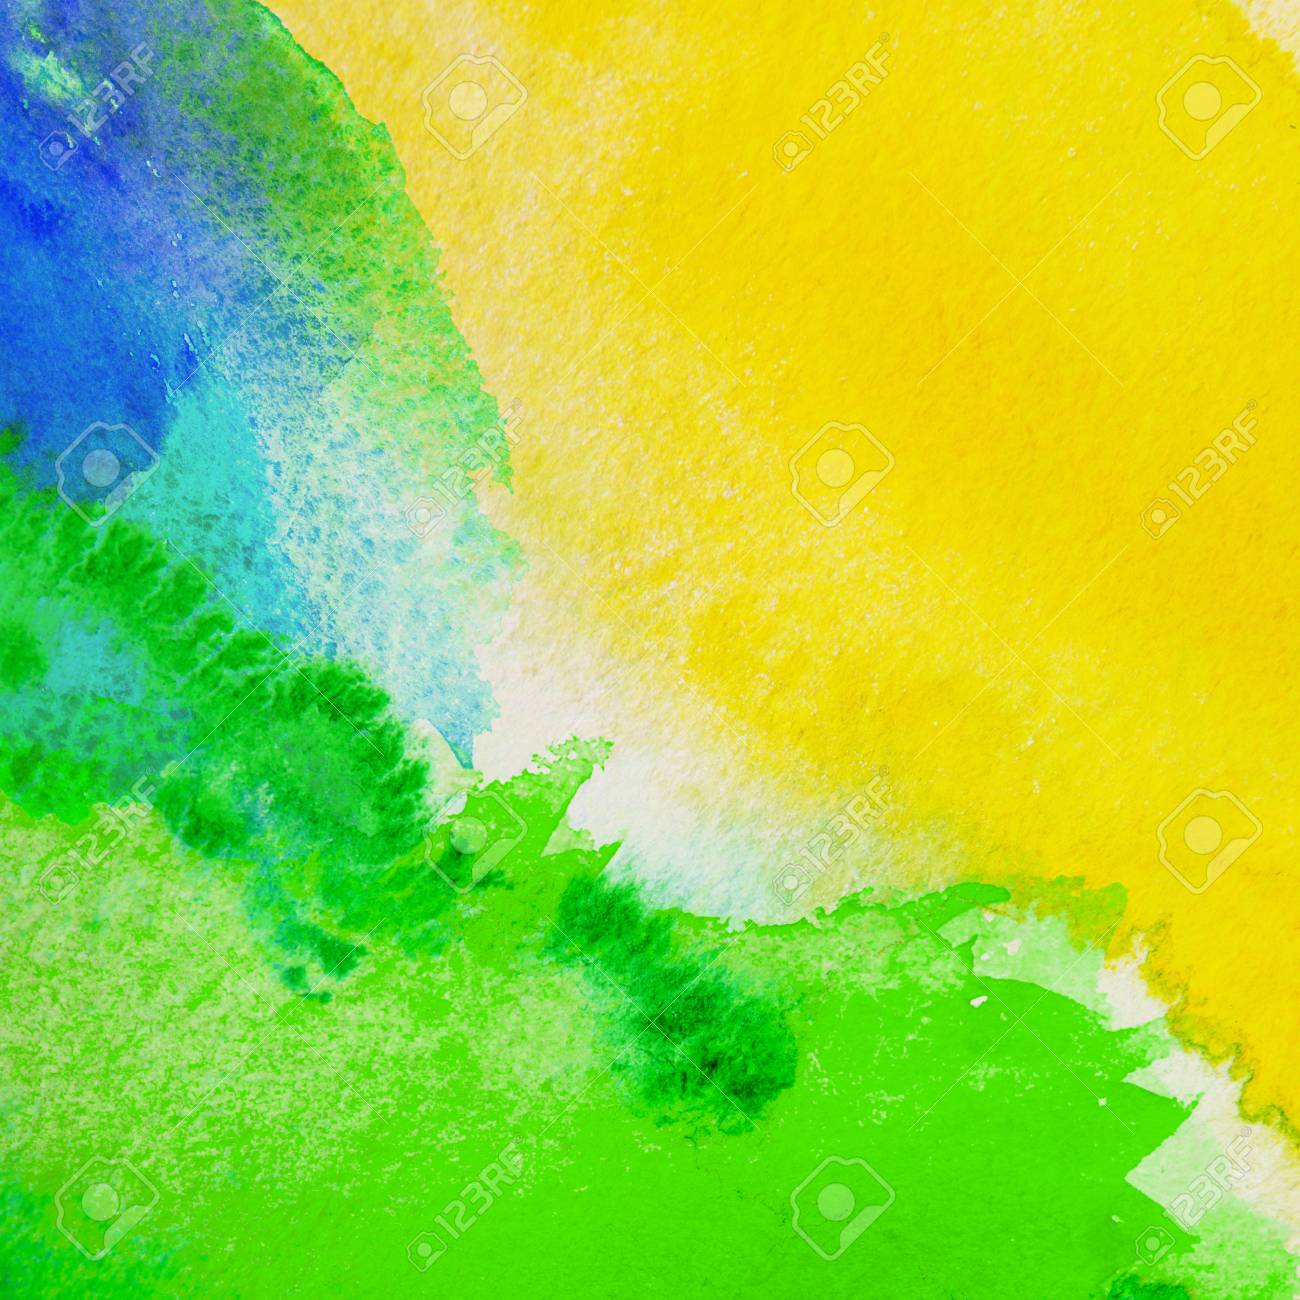 Brazil Tone Background Design Stock Photo Picture And Royalty